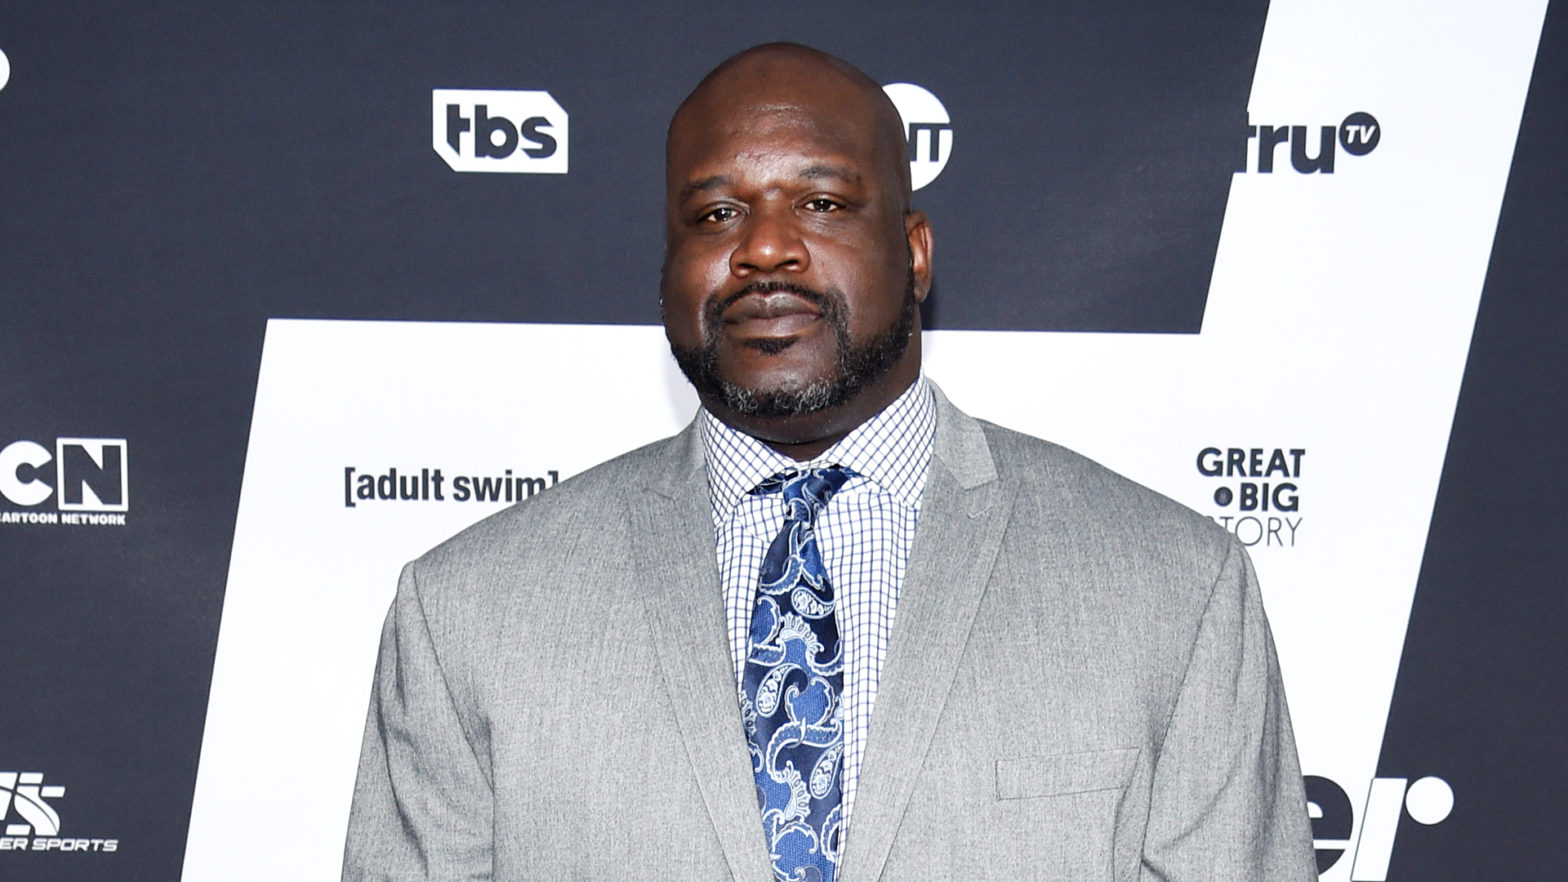 Here's Why Shaquille O’Neal Walked Away From A $40M Reebok Deal